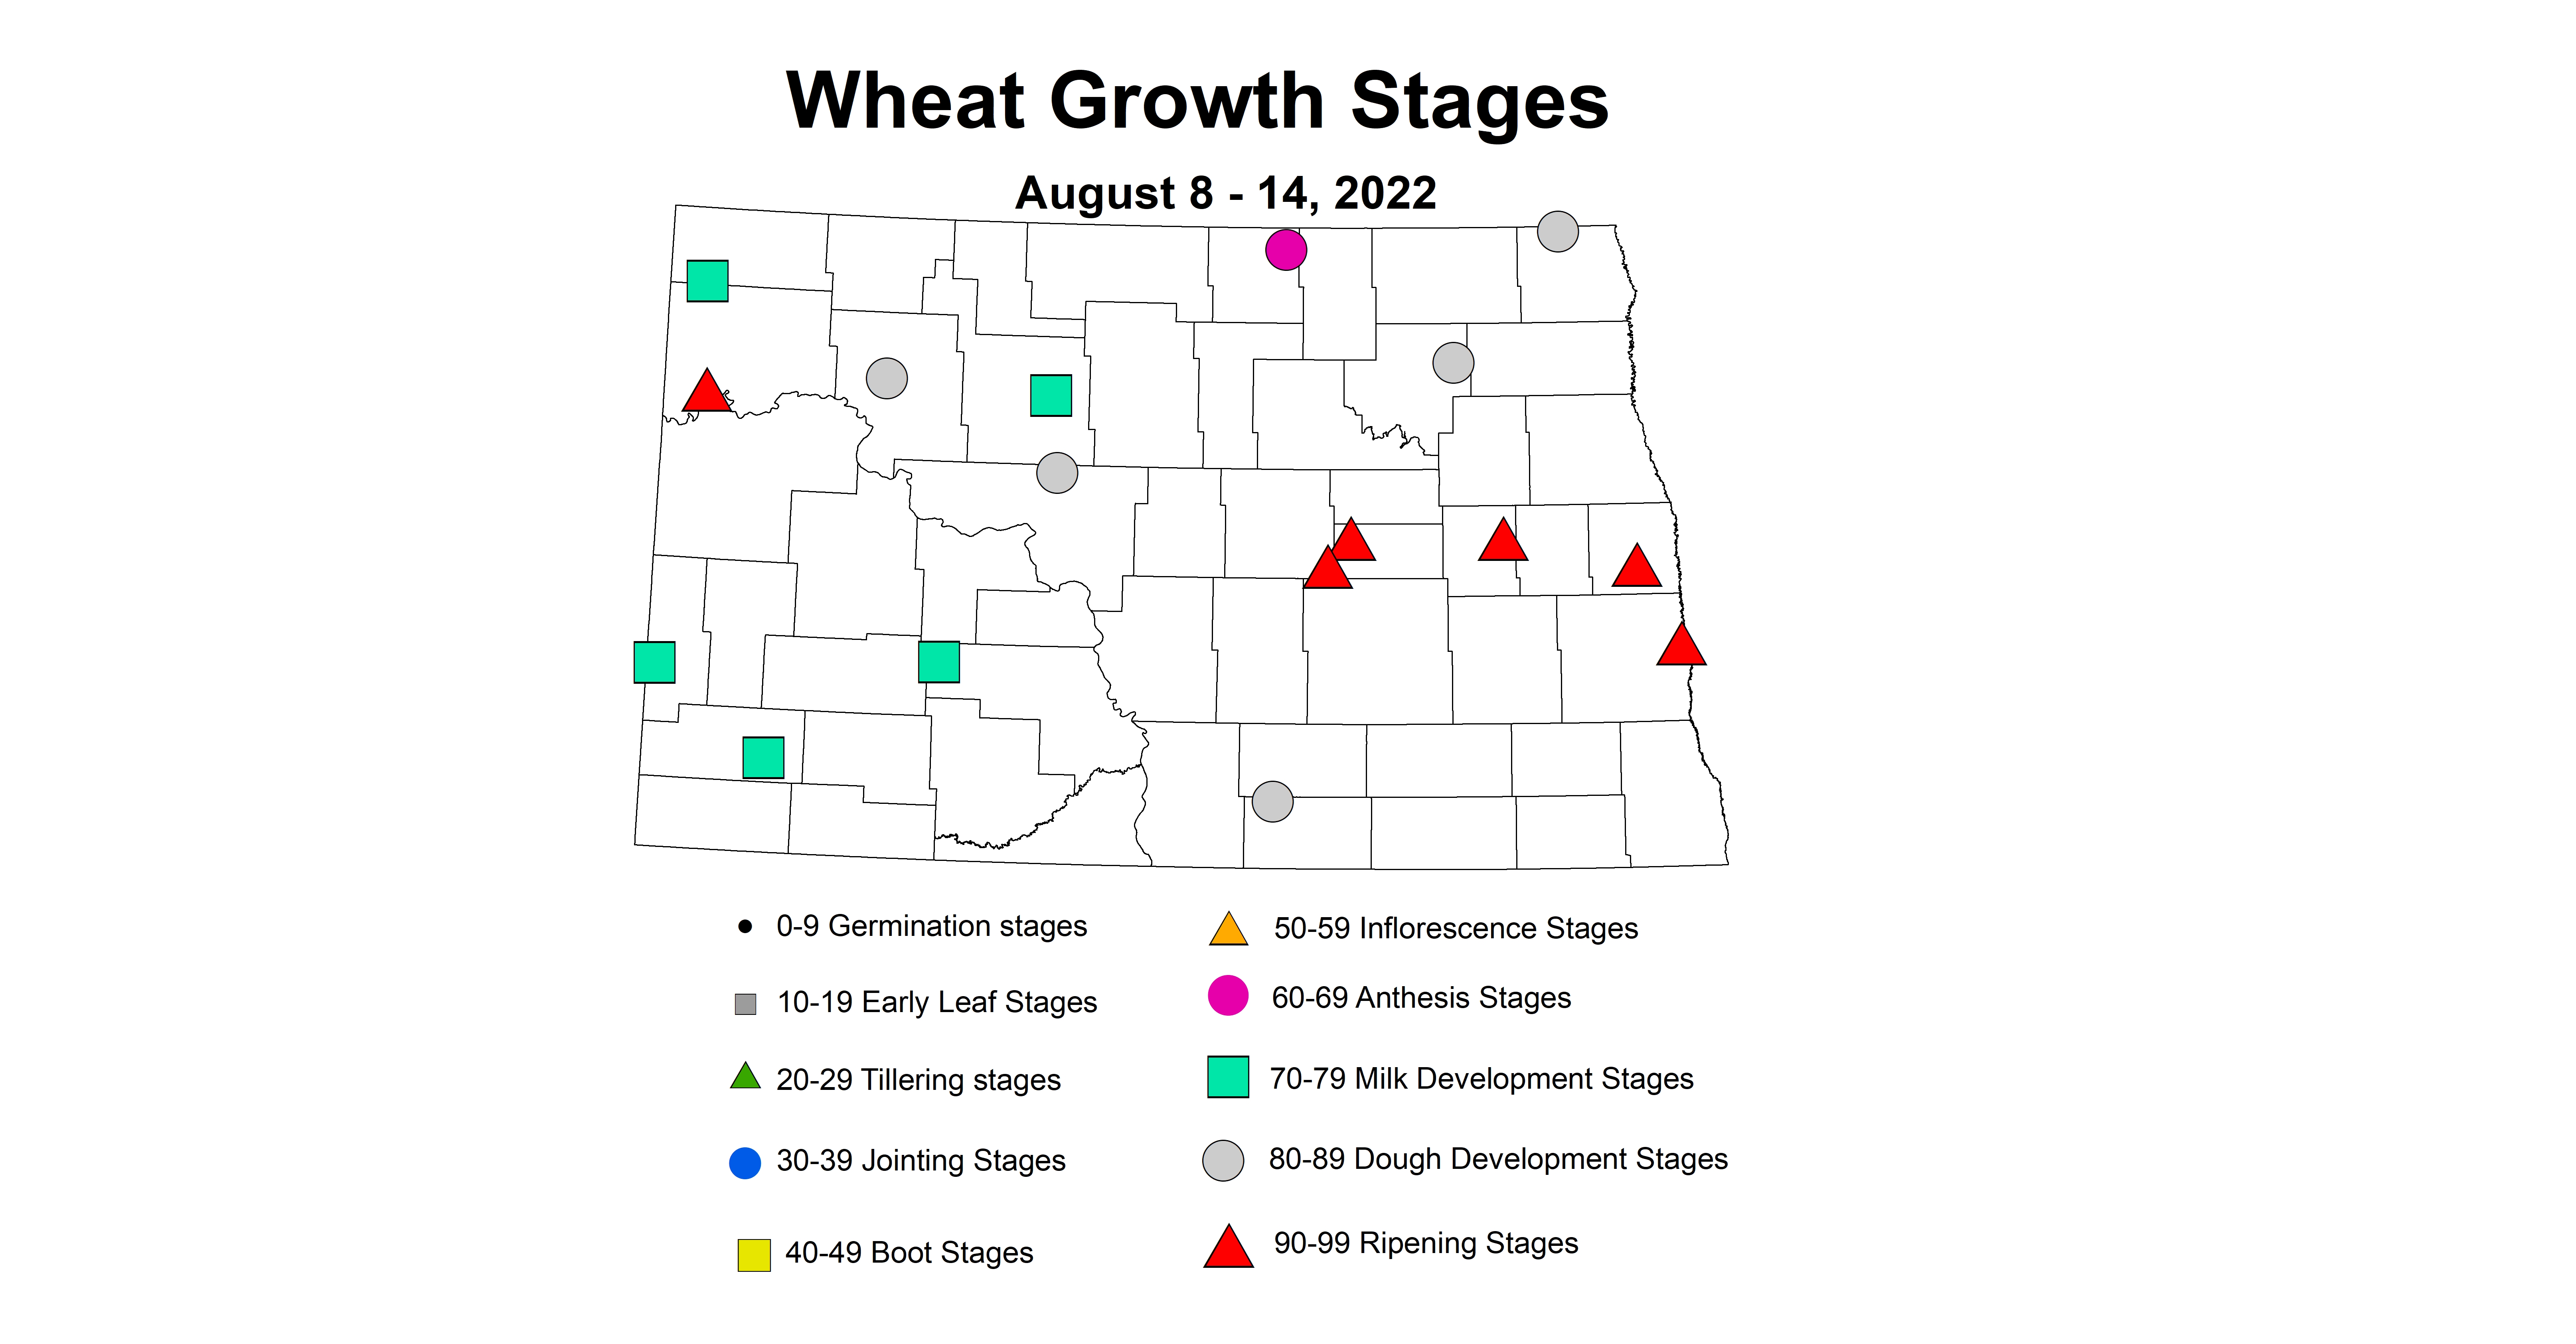 wheat growth stages 2022 8.8-8.14